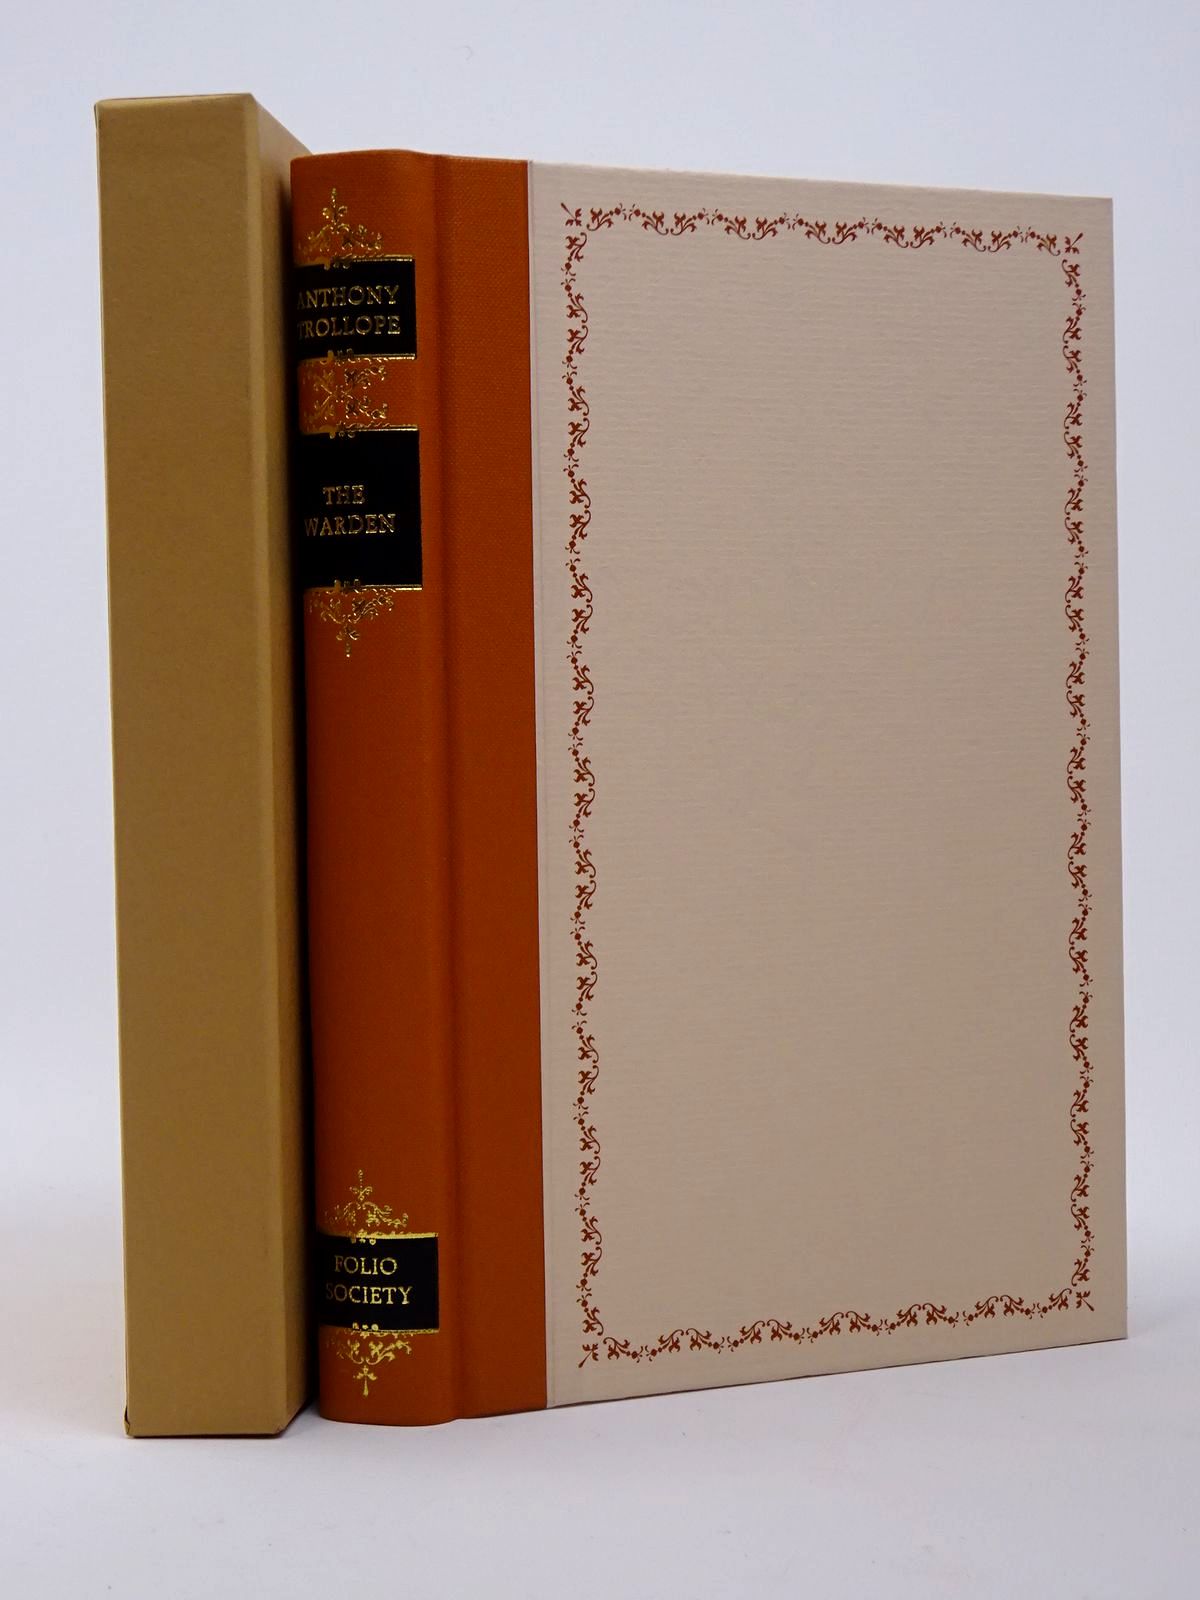 TROLLOPE, ANTHONY ILLUSTRATED BY PENDLE, ALEXY - The Warden